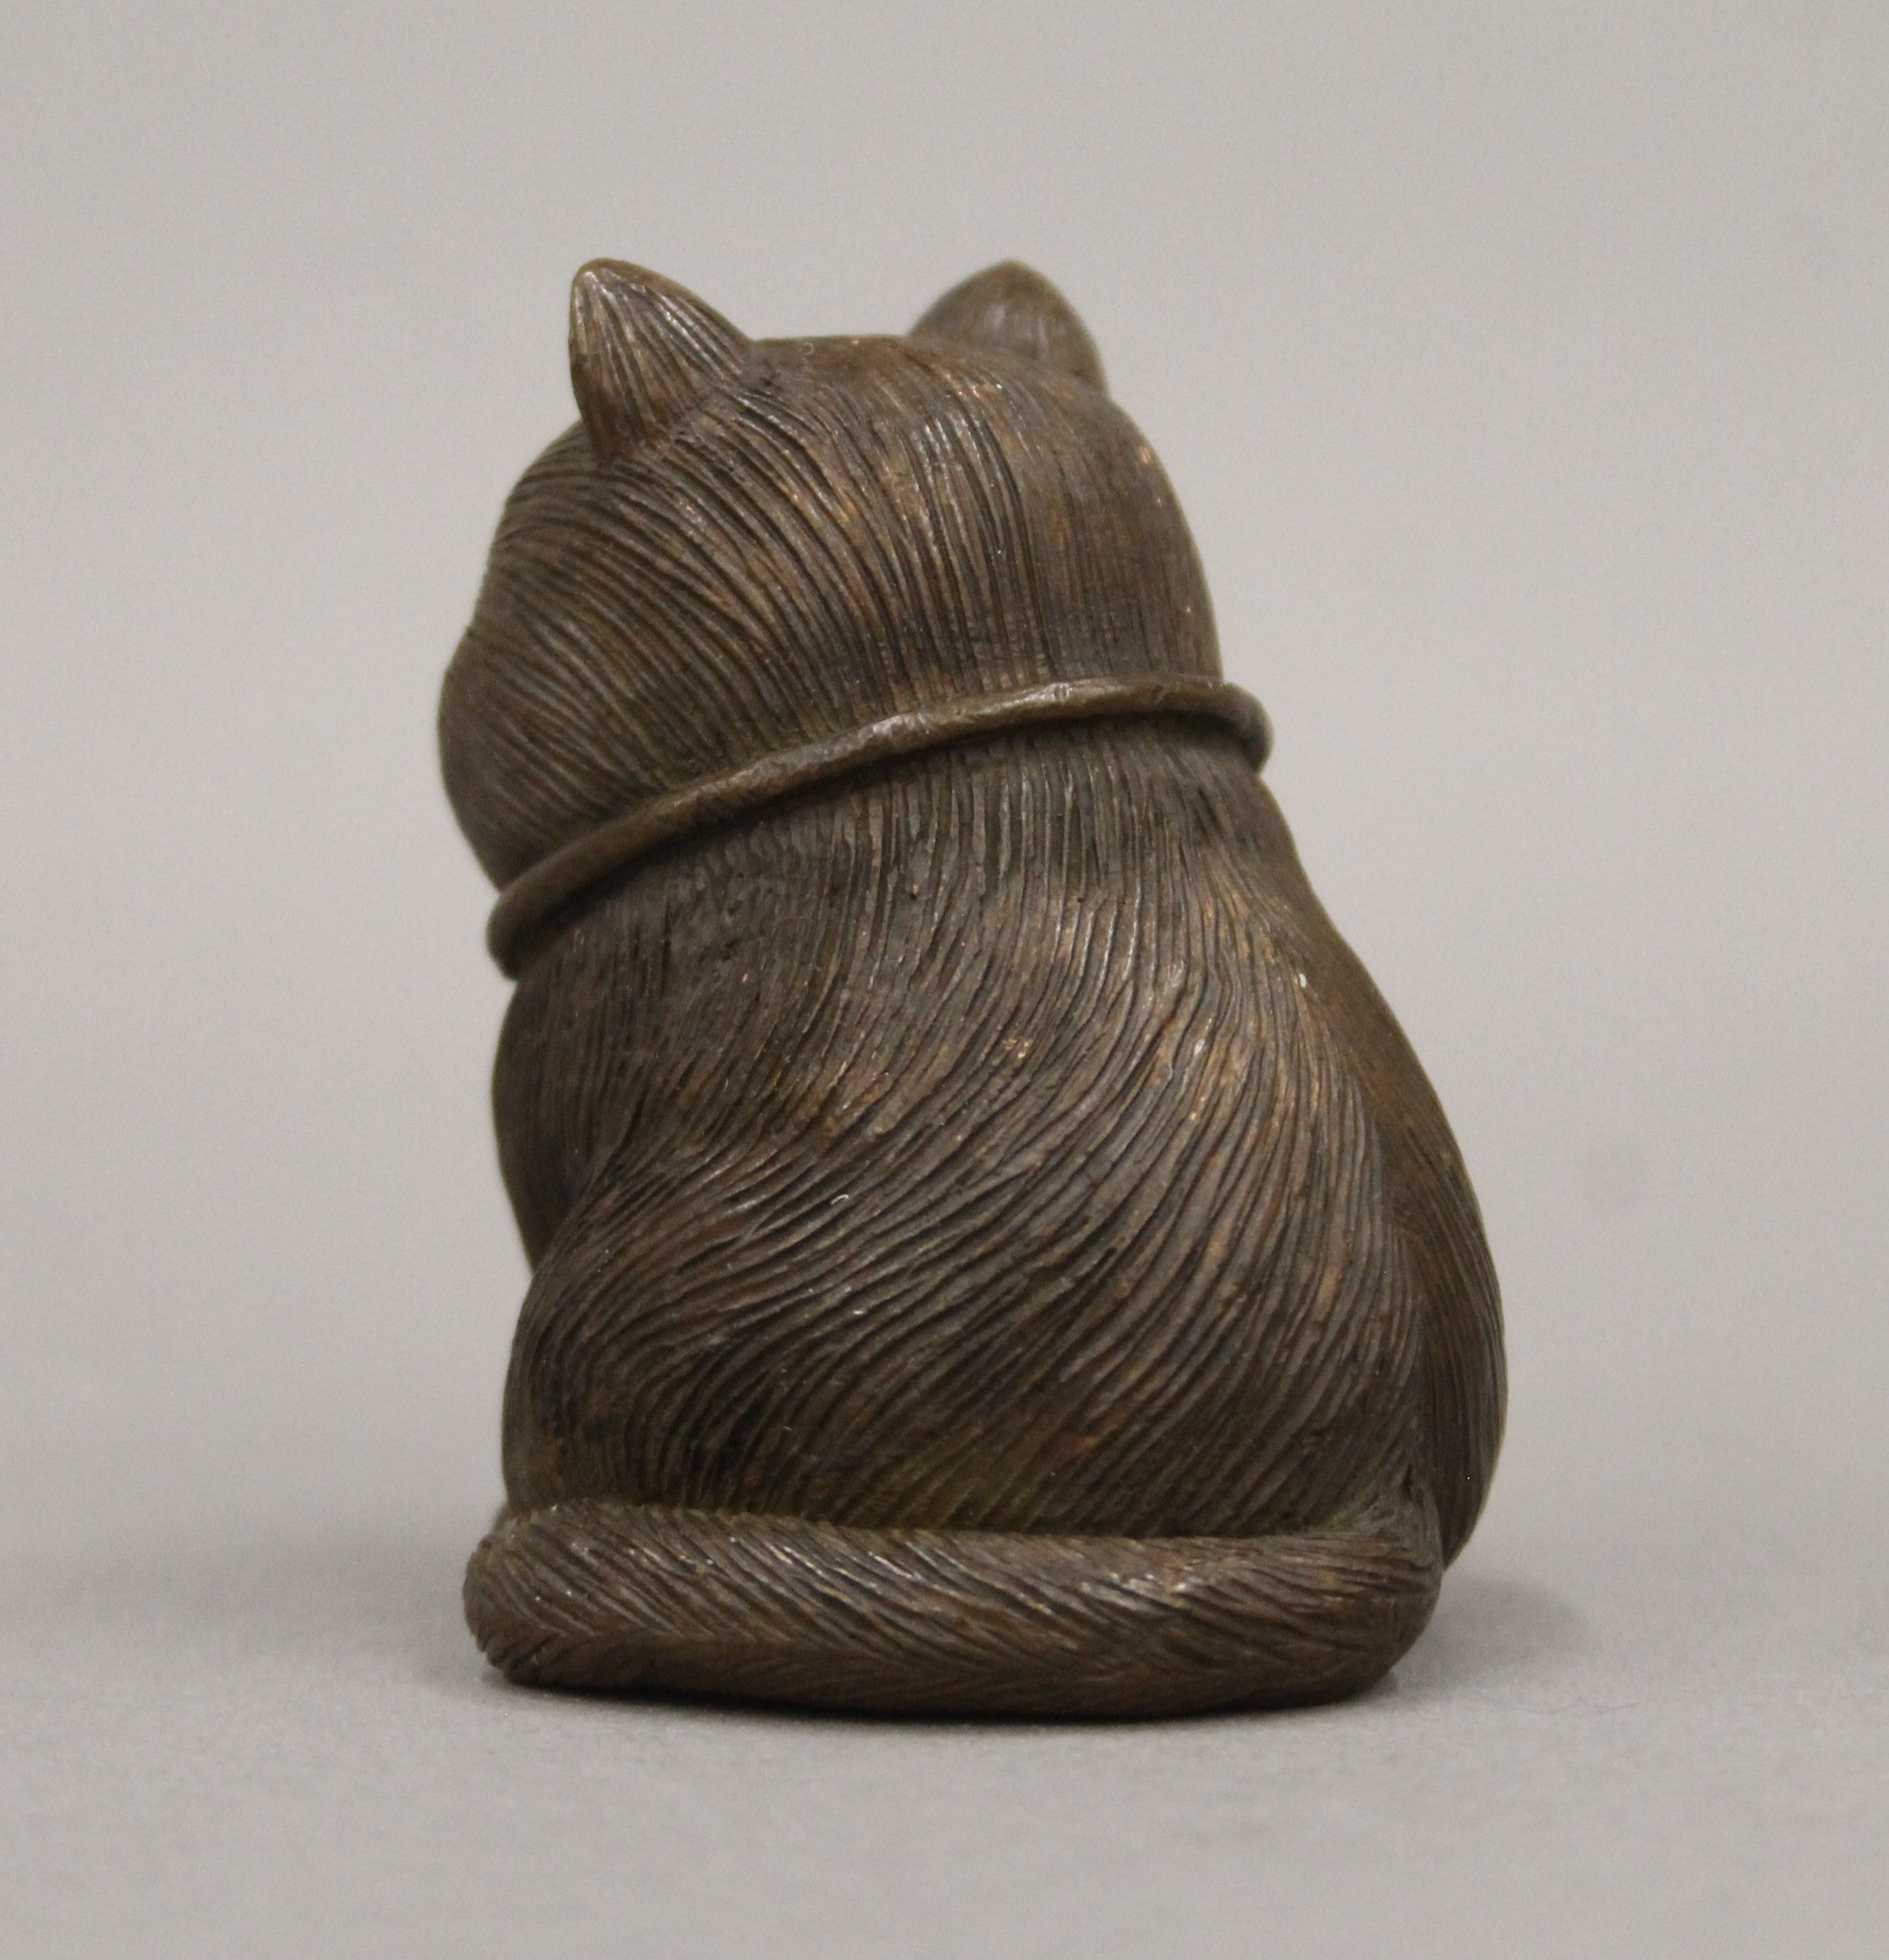 A bronze model of a cat. 5.5 cm high. - Image 3 of 5